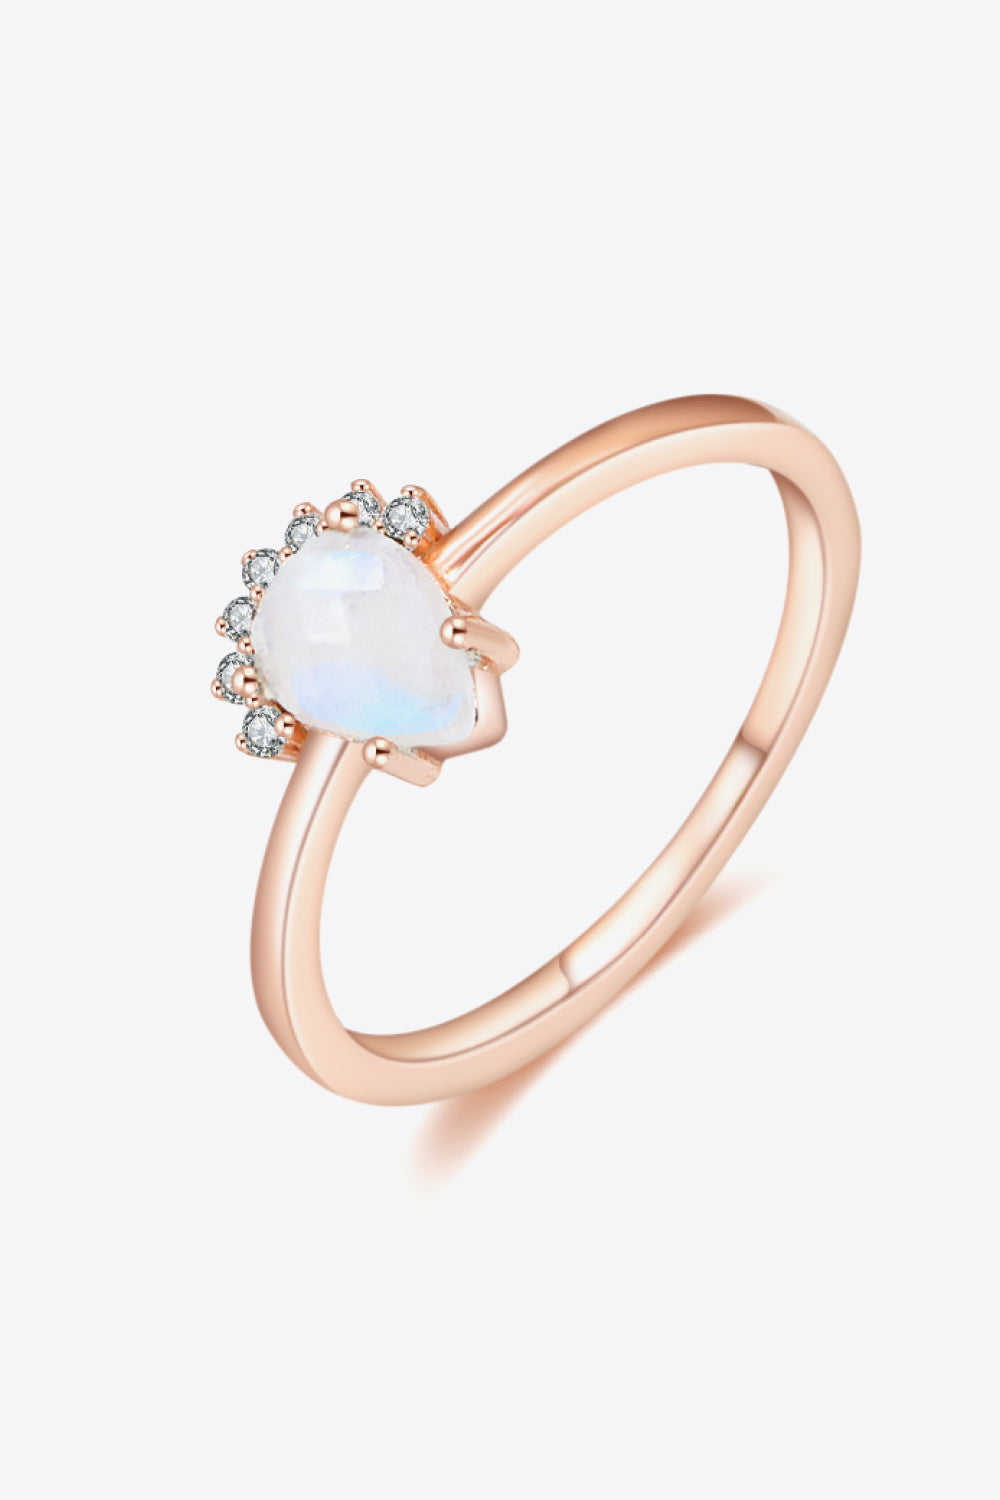 White Smoke 18K Rose Gold-Plated Pear Shape Natural Moonstone Ring Sentient Beauty Fashions rings